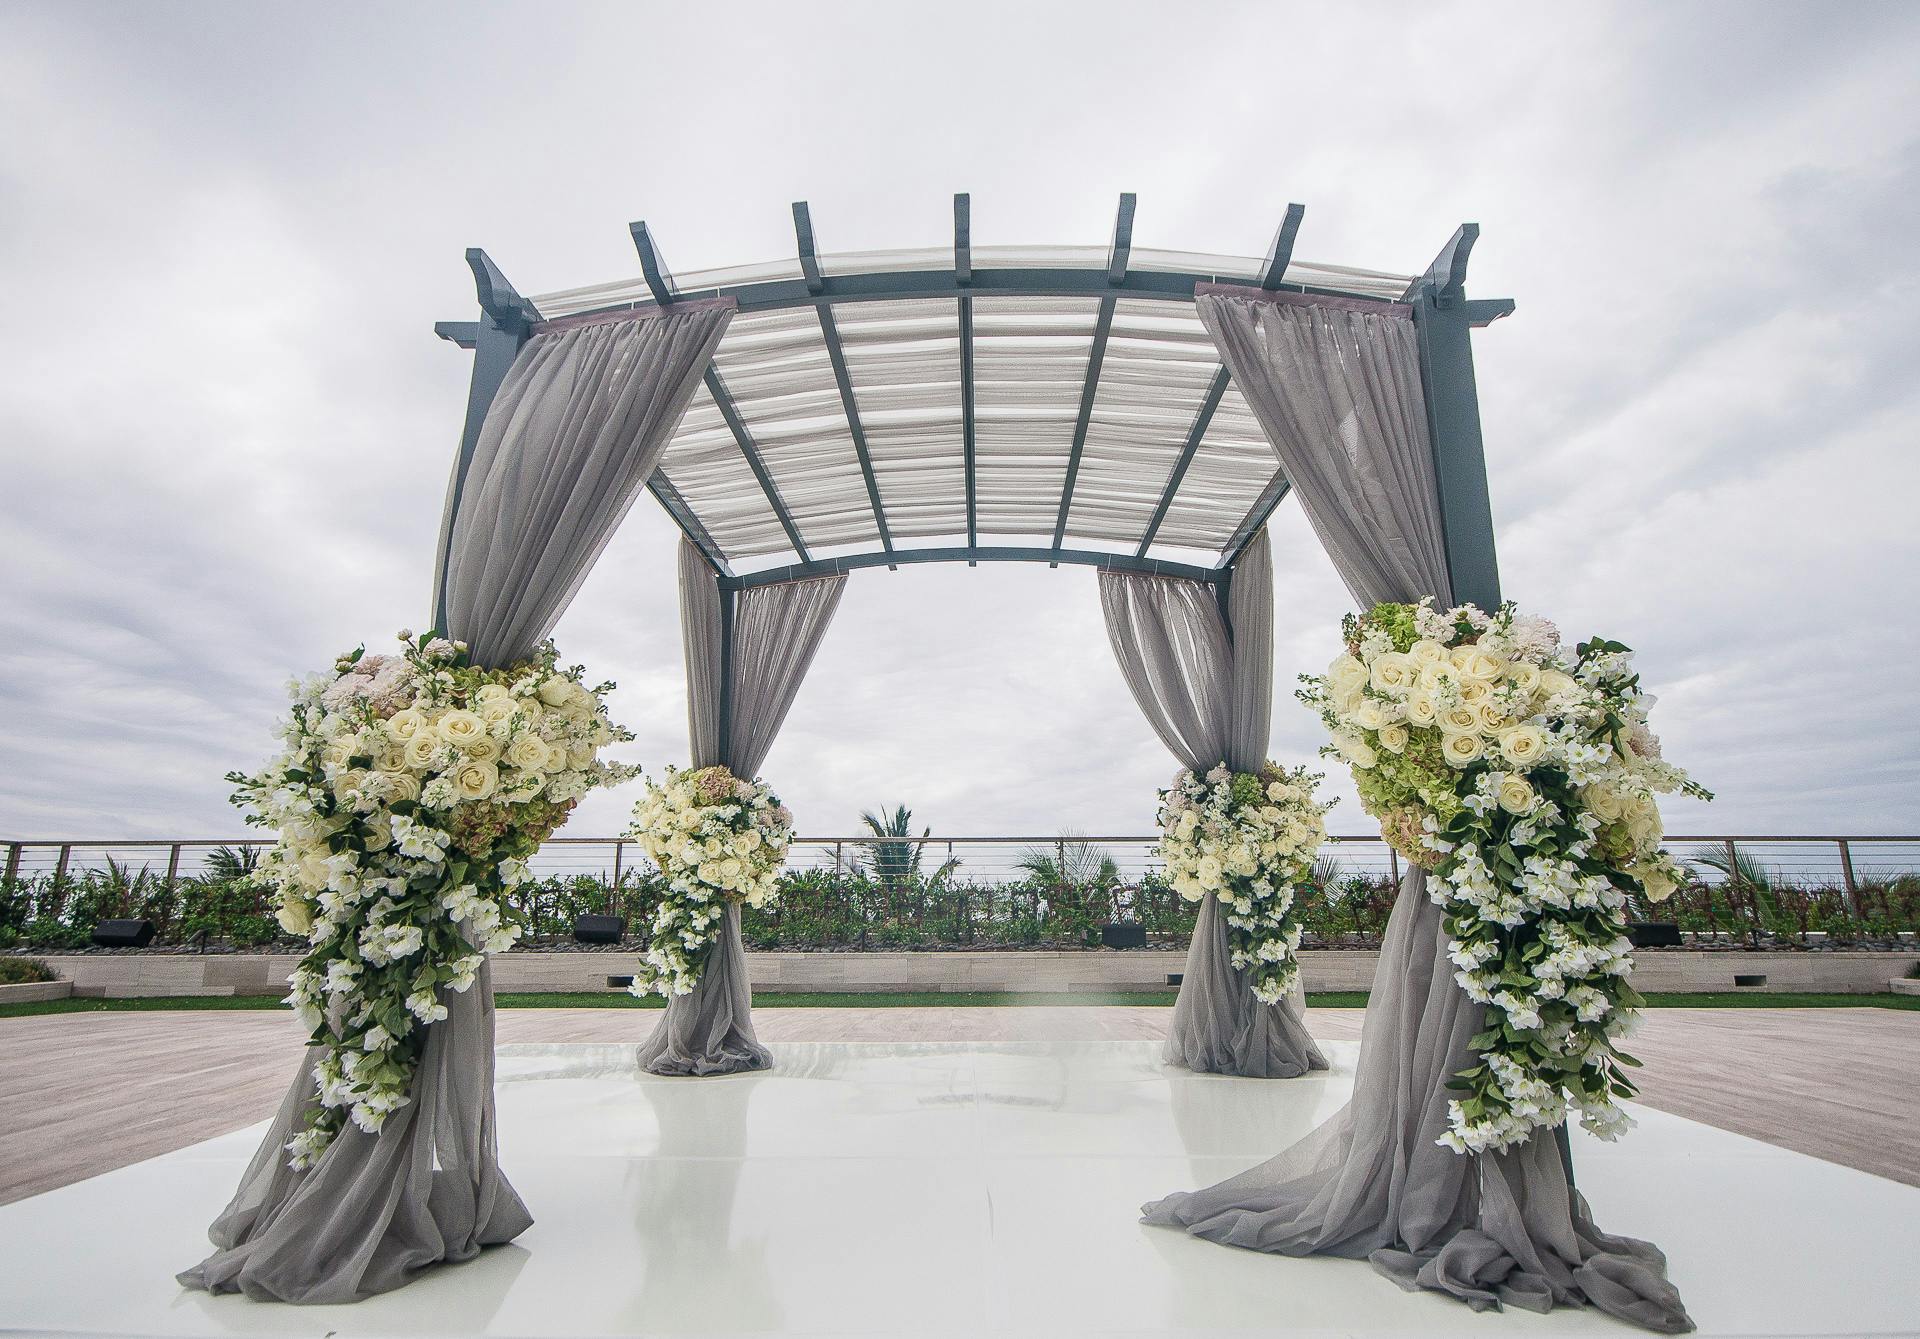 Modern Wedding Arch with Ethereal Gray Drapery and Florals in White and Green Spring Wedding Colors